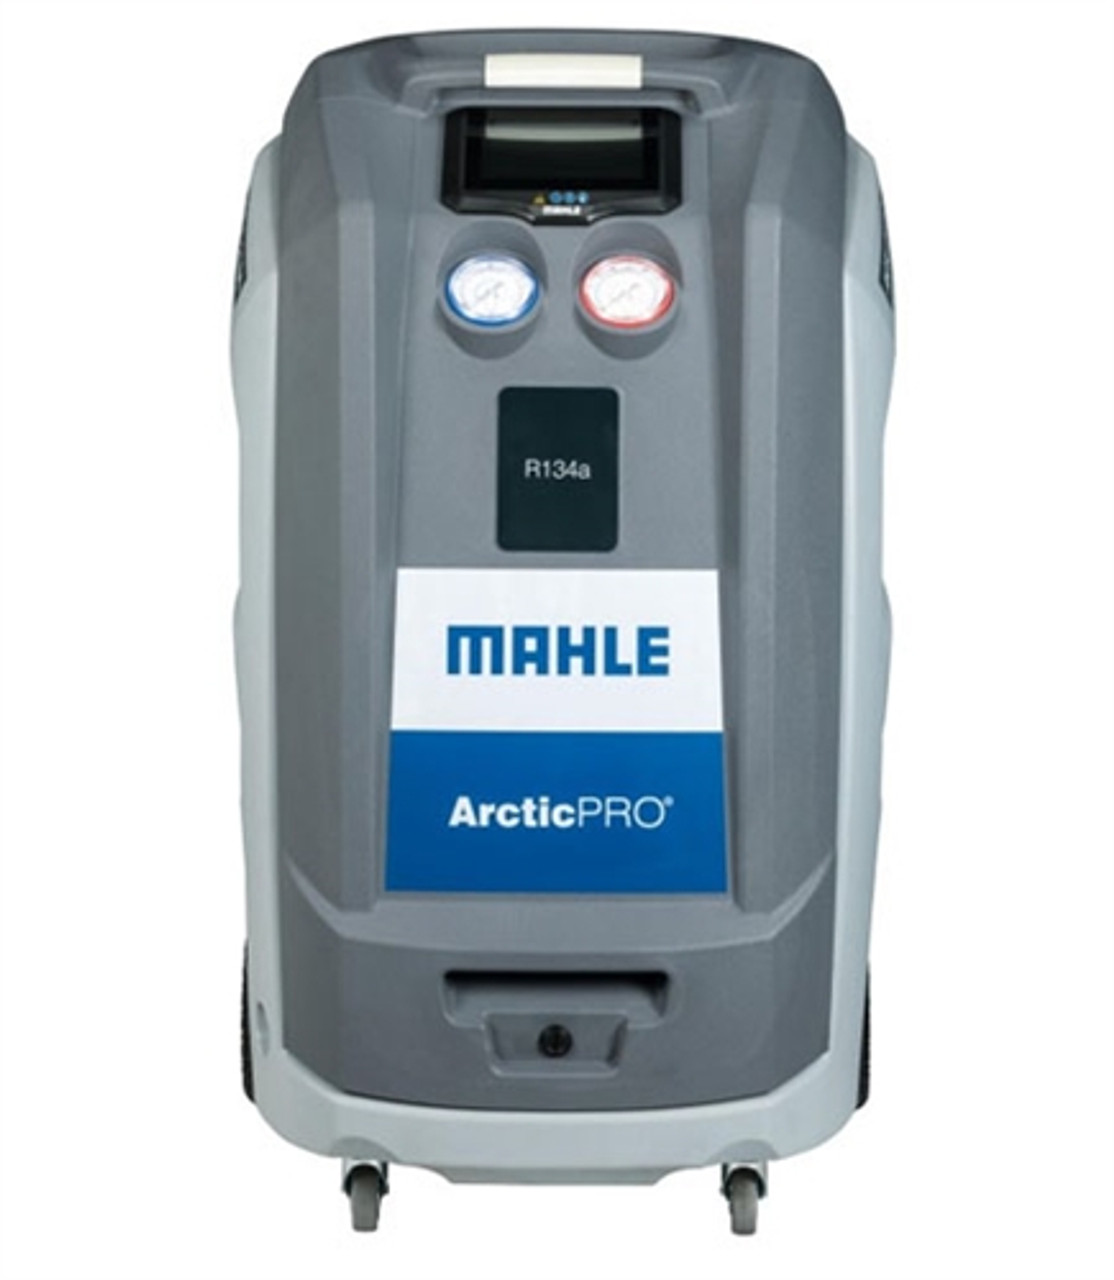 Mahle ACX2150 ArcticPRO® R134a Refrigerant Recovery, Recycling, and Recharging MachineSystem